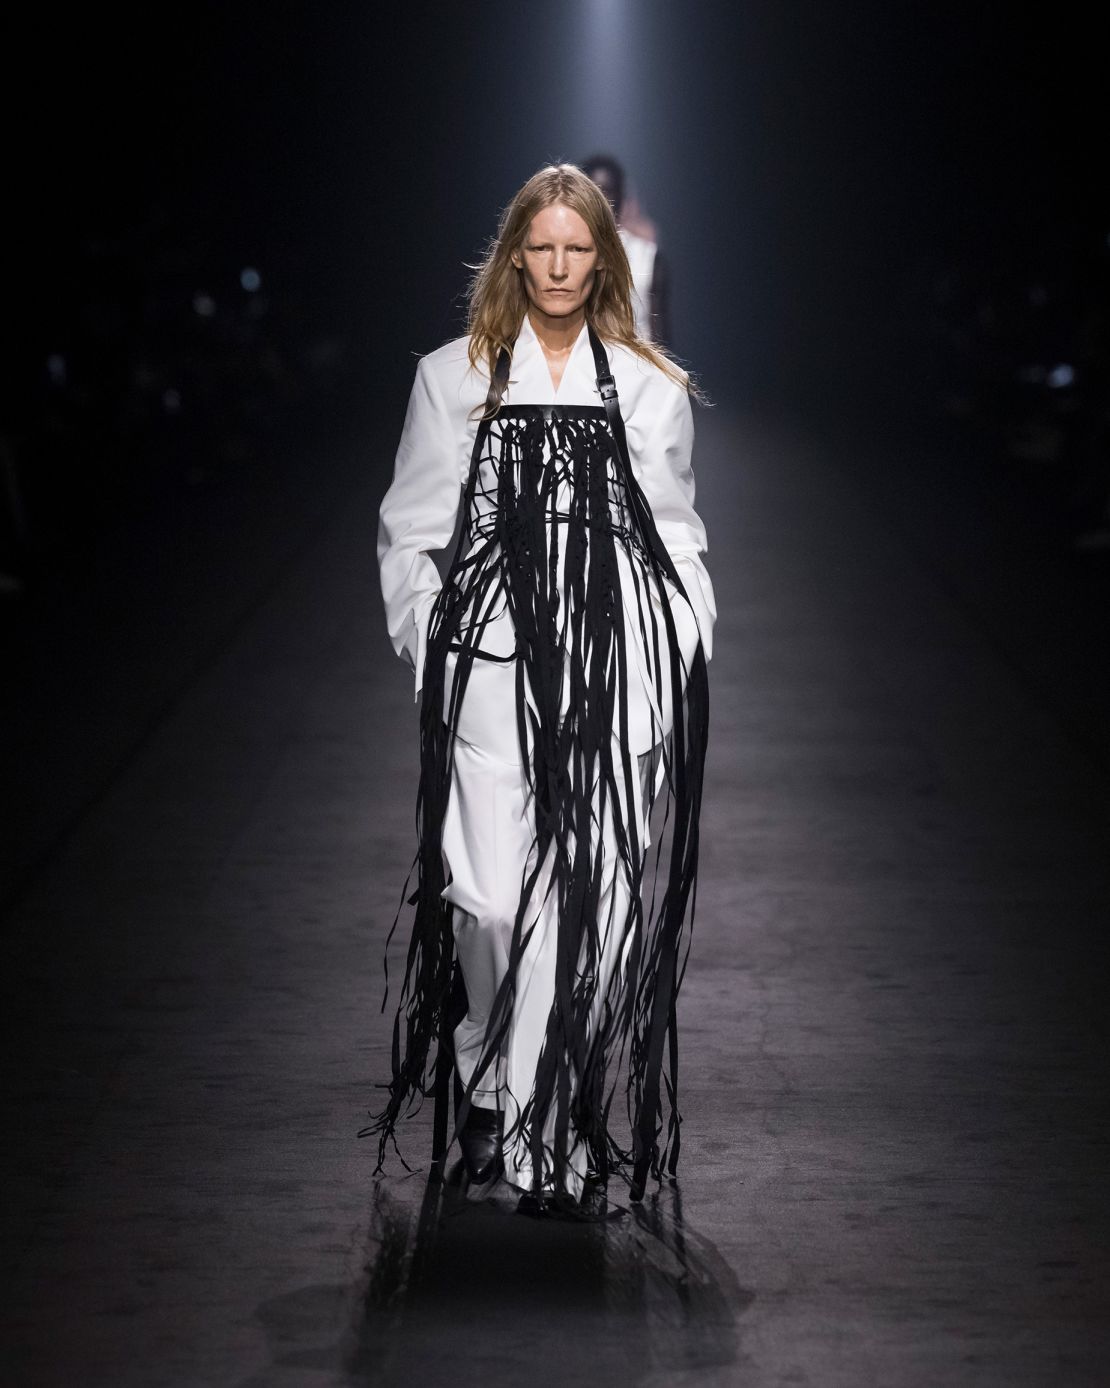 Stefano Gallici showed his first collection for storied Belgian fashion house Ann Demeulemeester, in keeping with its edgy, understated aesthetic.